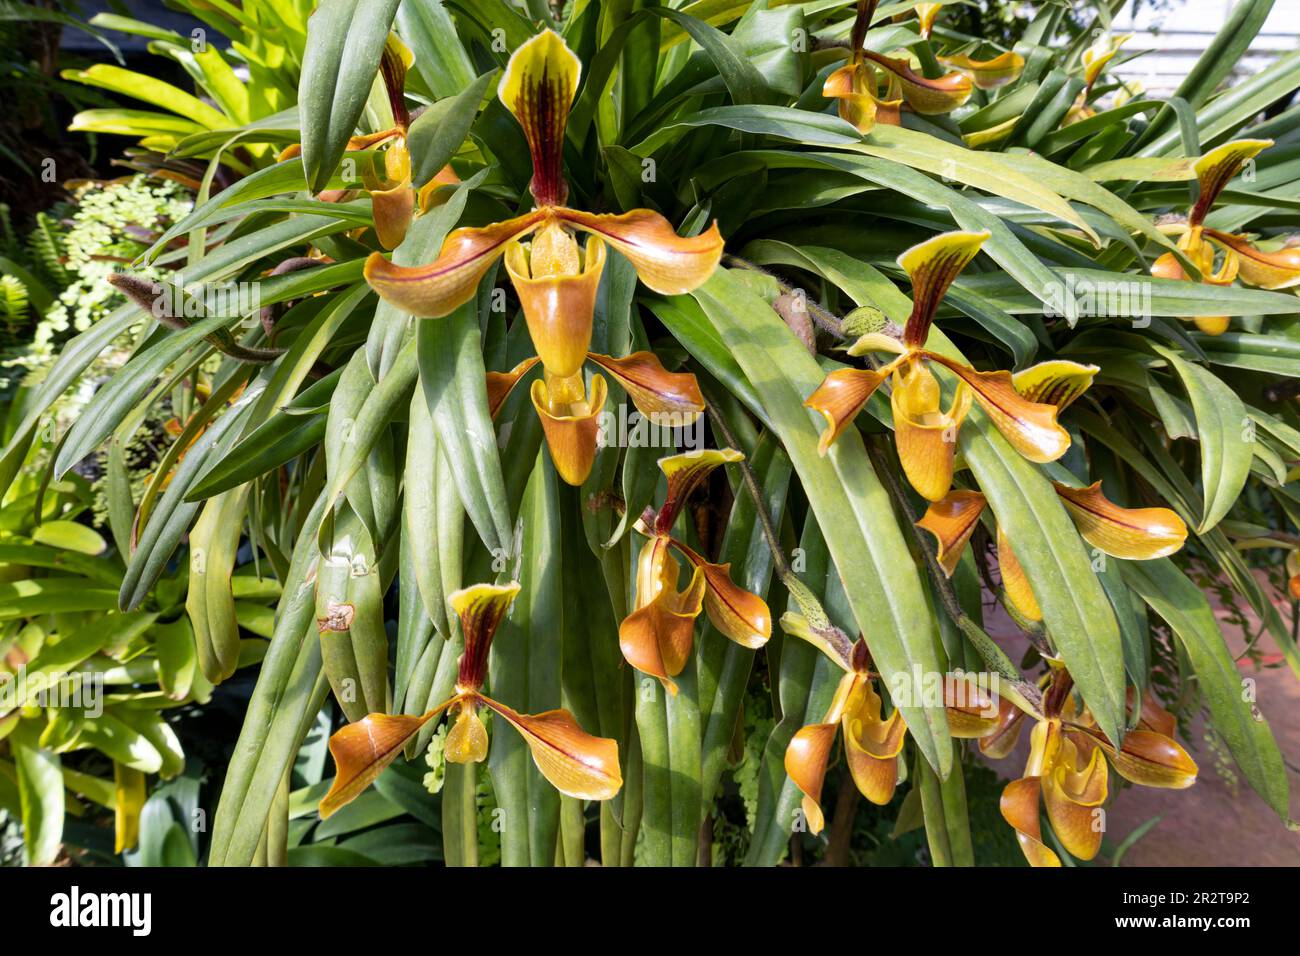 Ward's Paphiopedilum Orchid in bloom, Rare colorful orchid Stock Photo